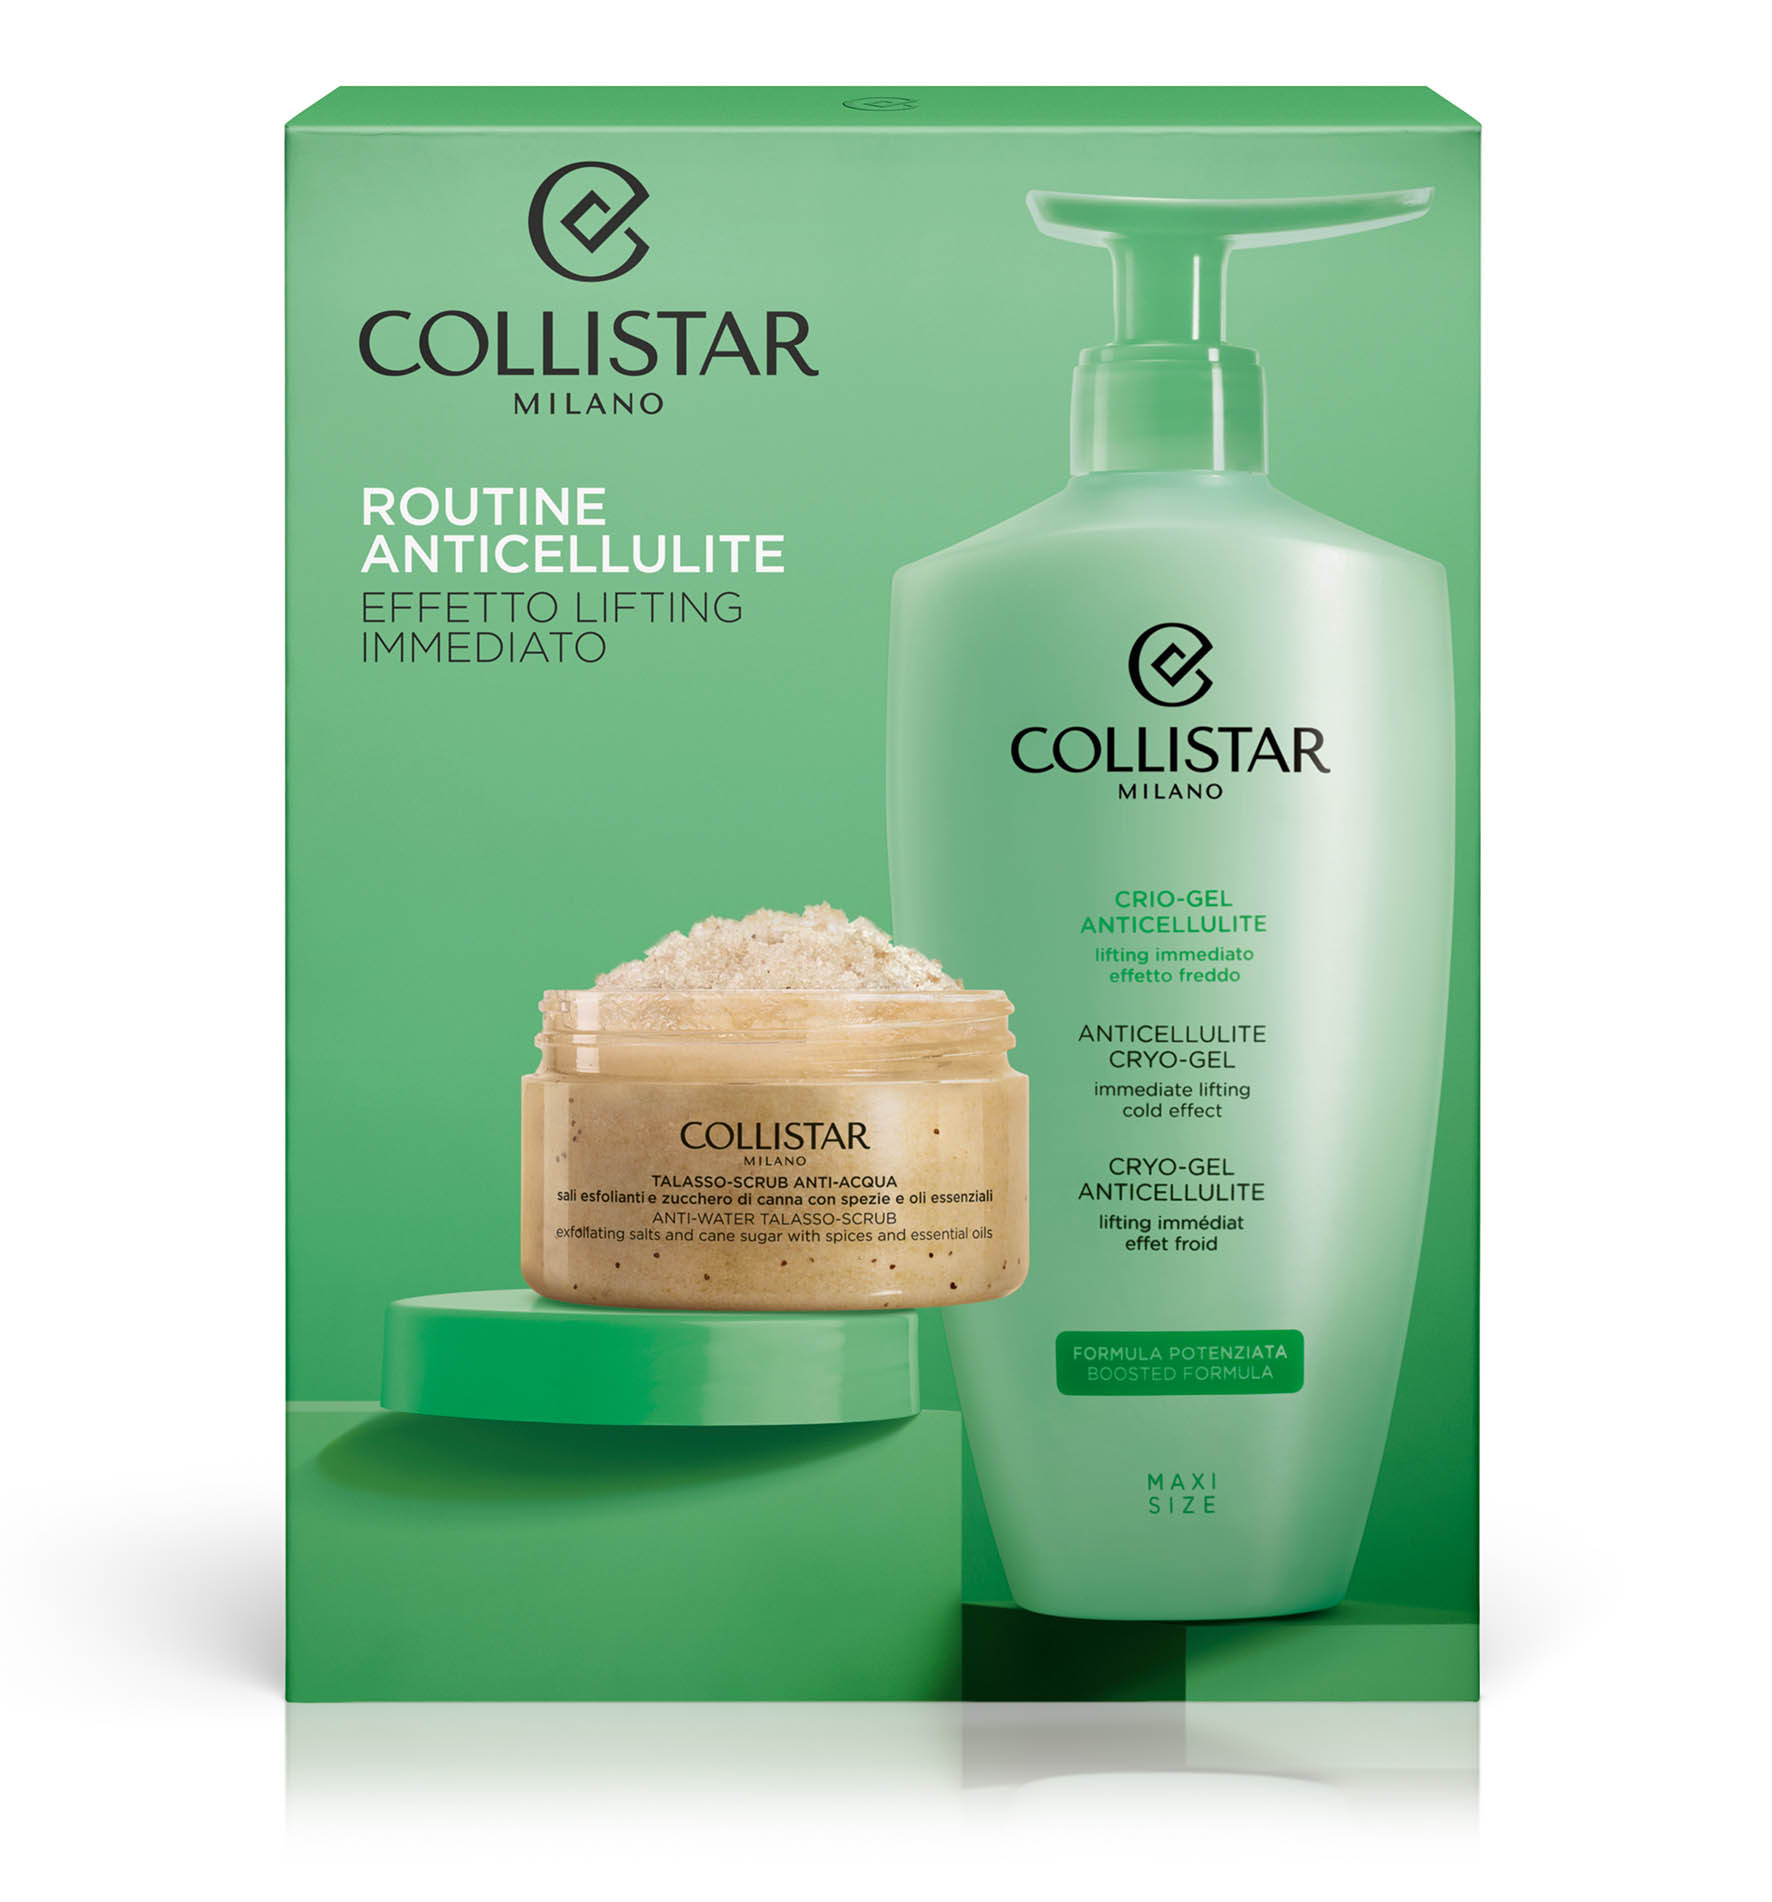 ANTICELLULITE ROUTINE IMMEDIATE LIFTING EFFECT - Cellulite | Collistar - Shop Online Ufficiale